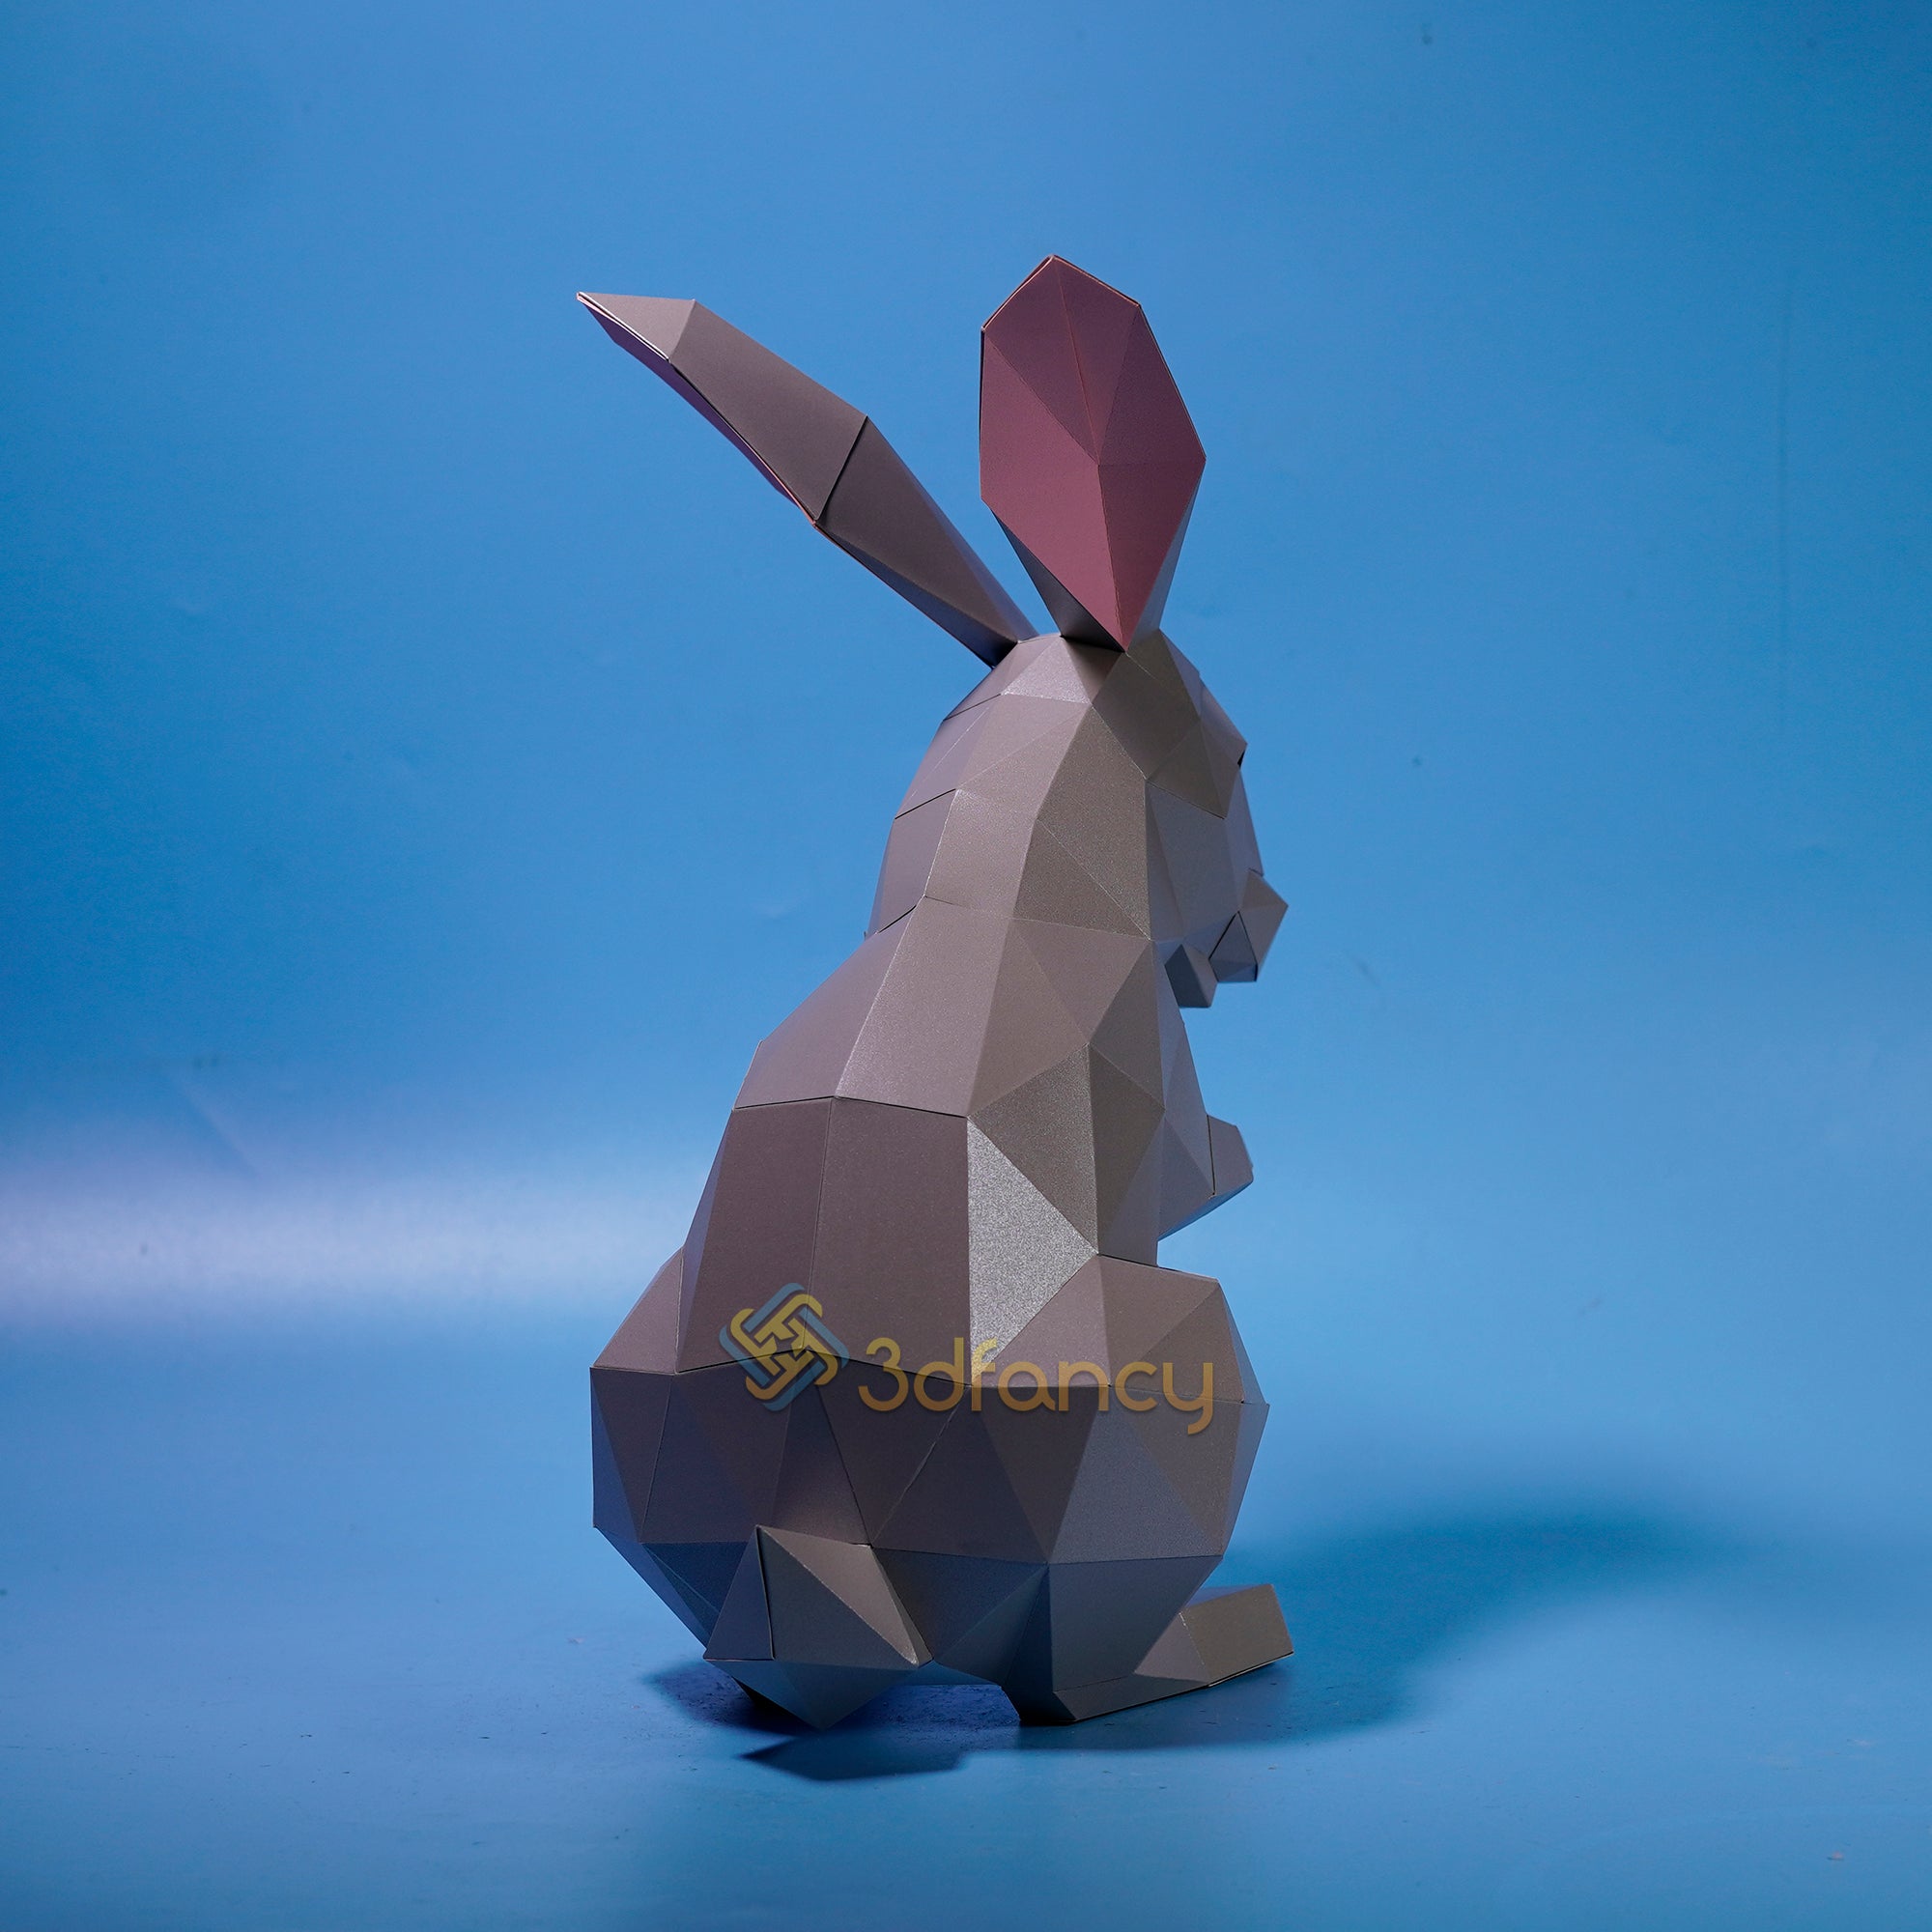 Rabbit Standing 3D Papercraft PDF, SVG Template For DIY Bunny Rabbit For Easter Decor, Rabbit Origami, Low Poly, Sculpture, Bunny Model